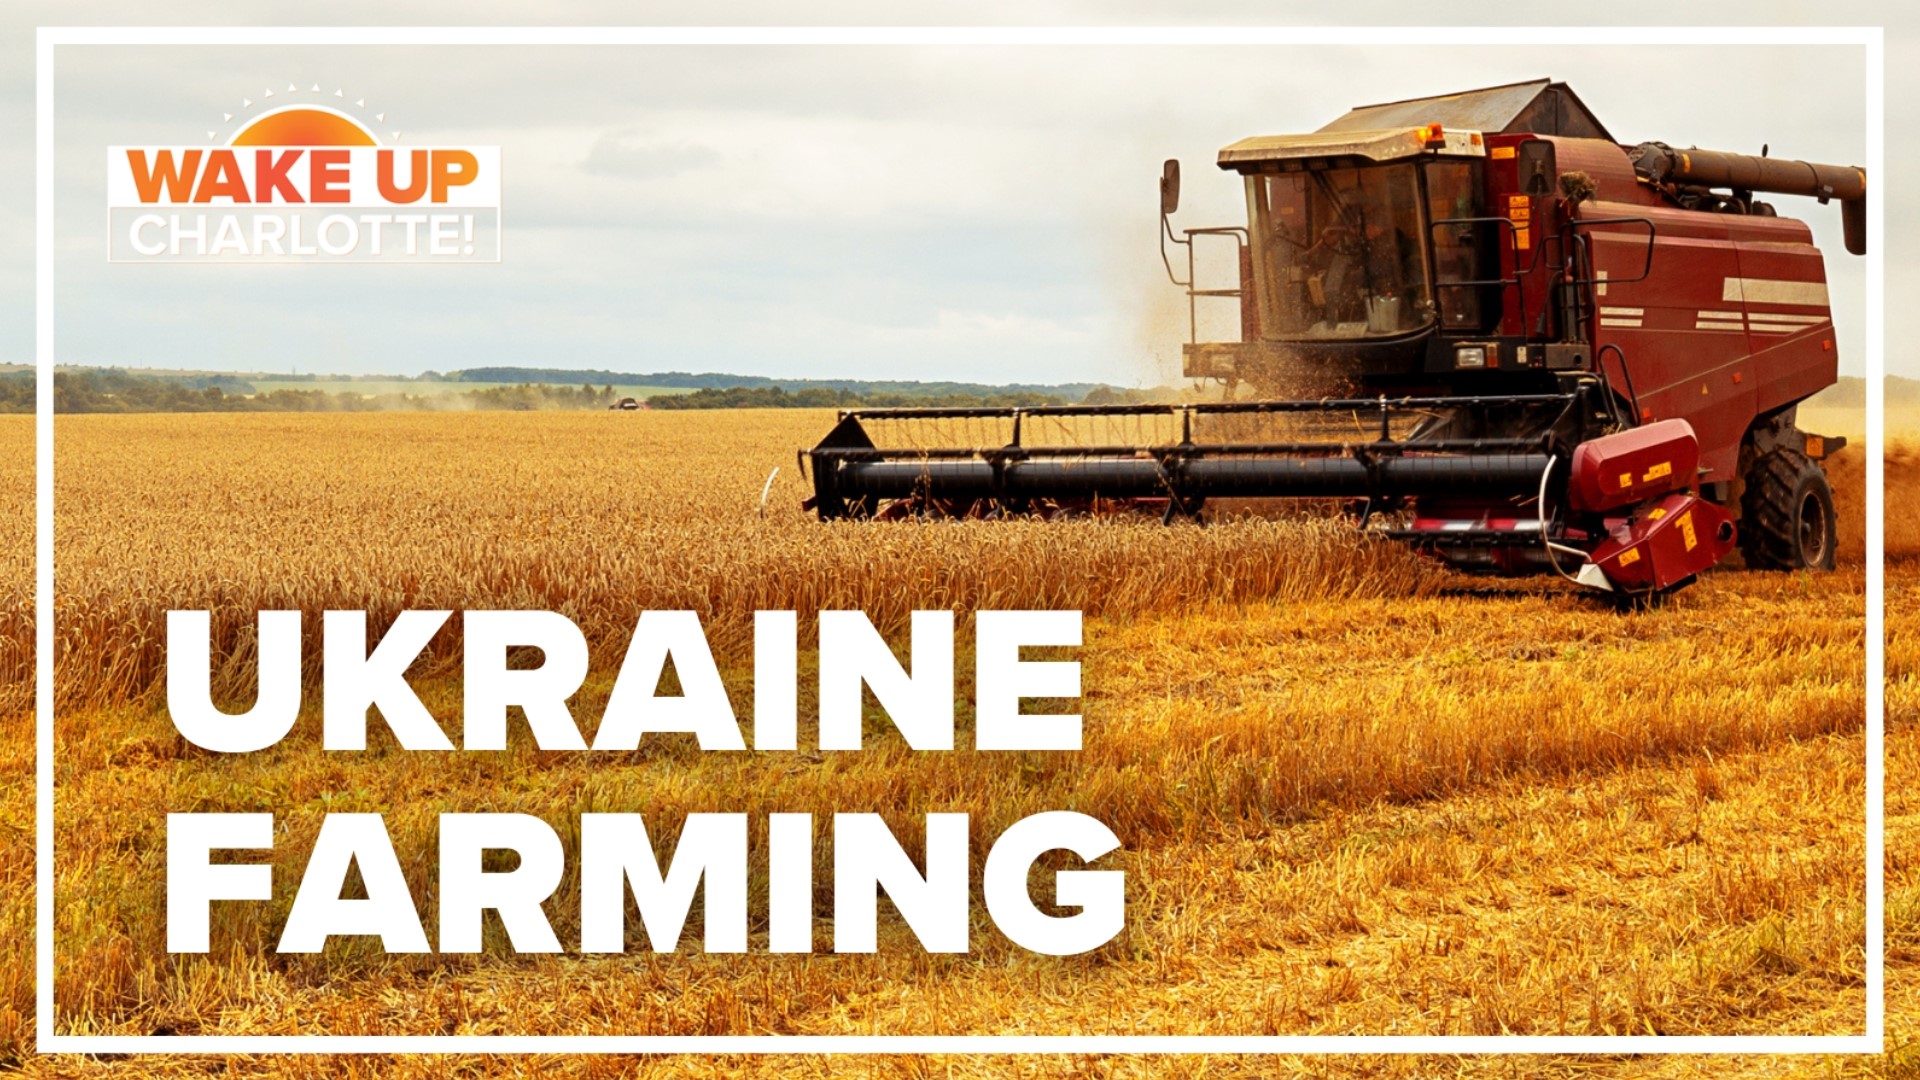 Right now, Russia is blocking seaports in Ukraine, choking off the country's supply of grain to the rest of the world.